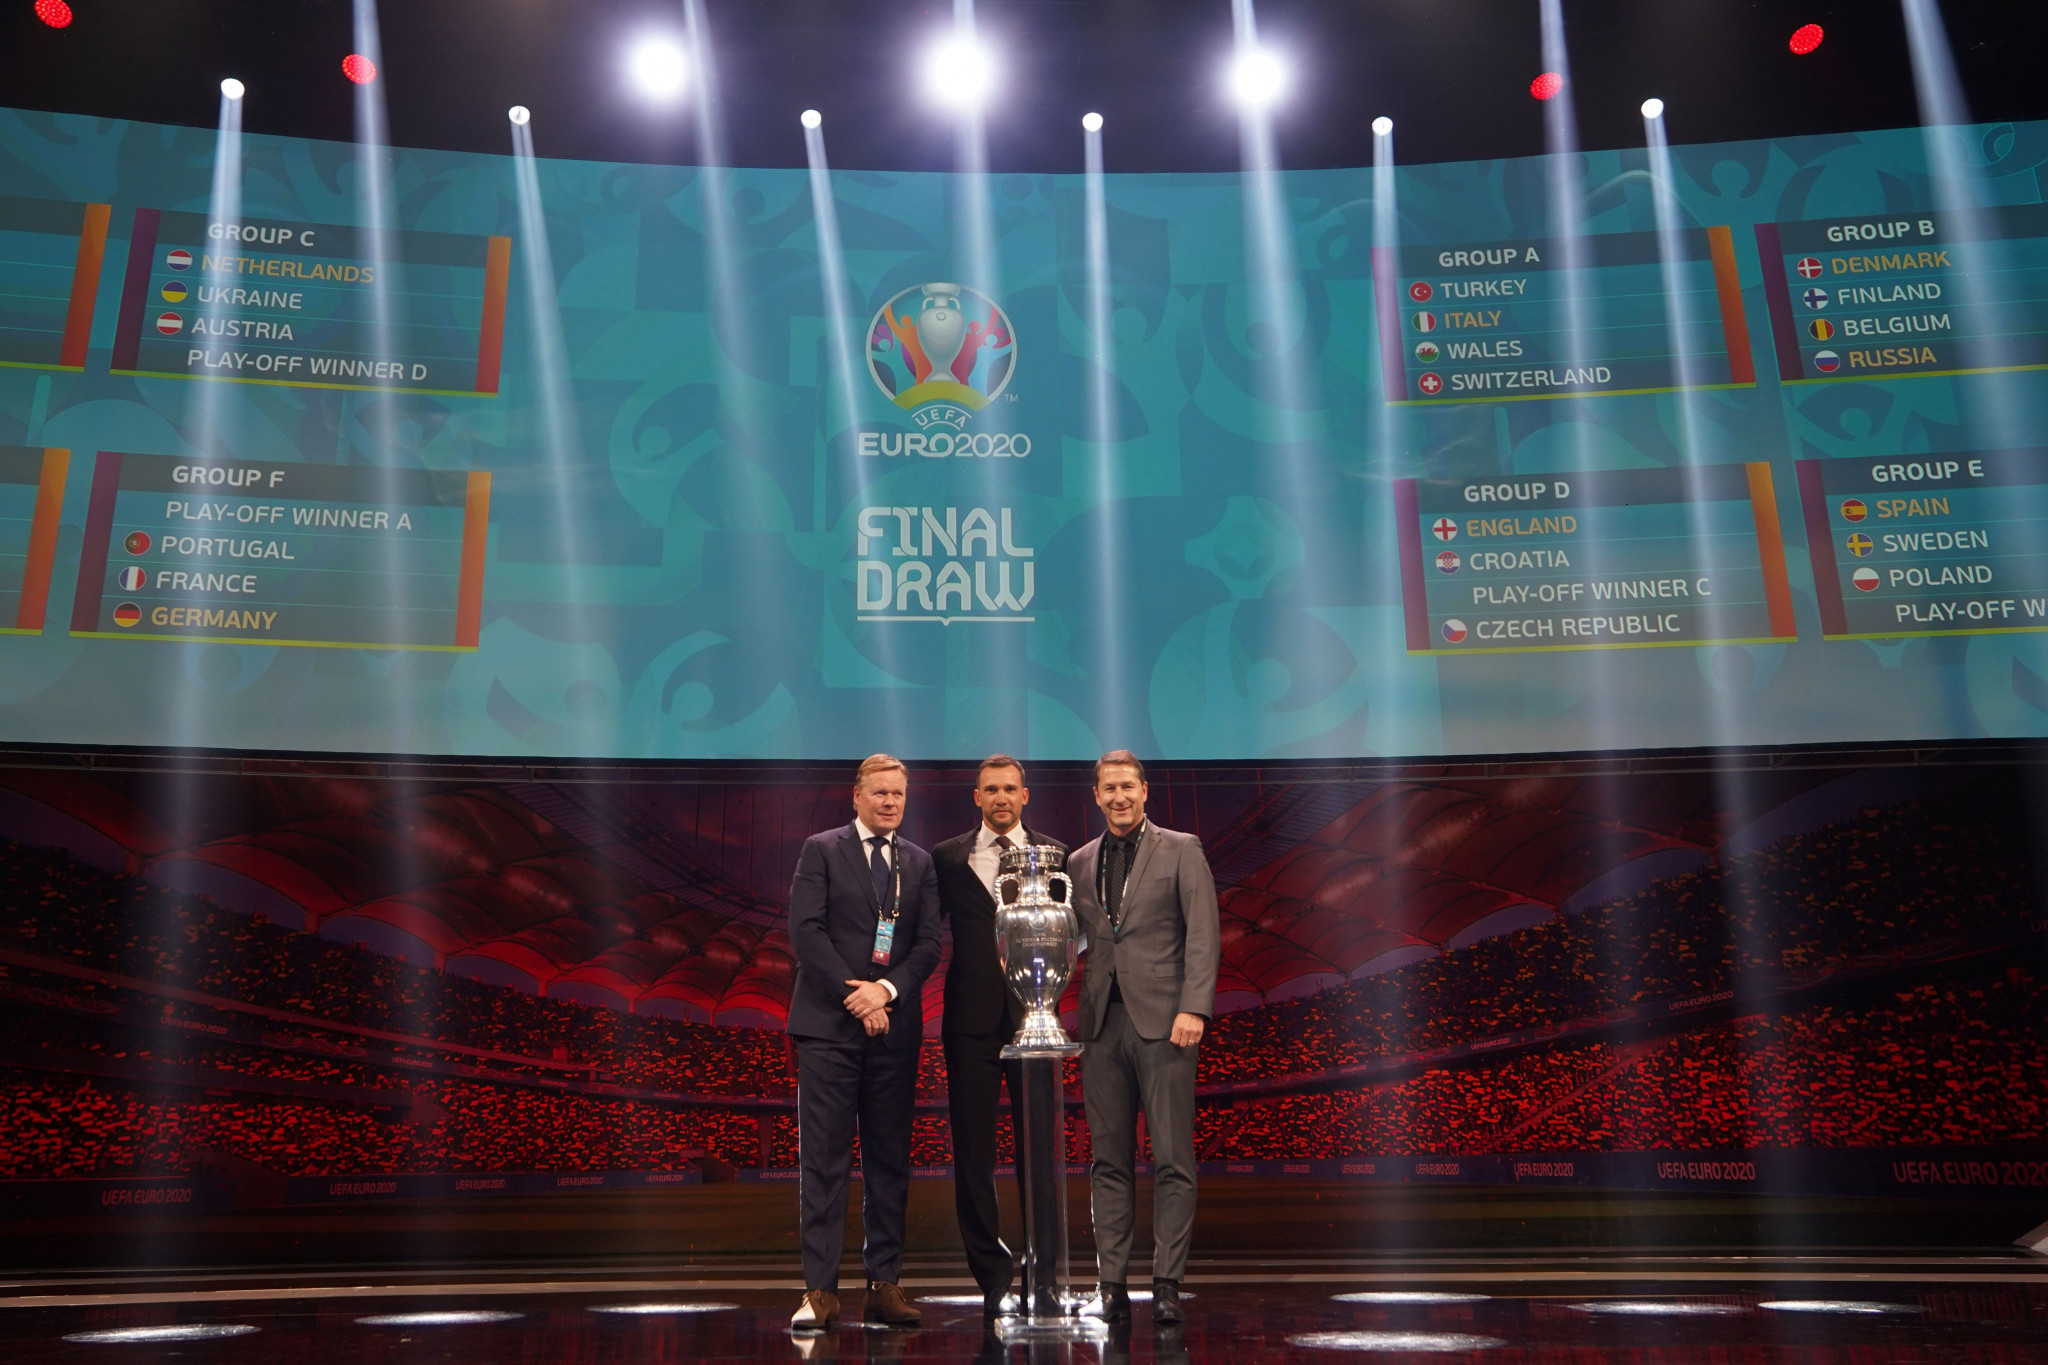 Match Tickets For Euro 2020 To Go On Sale As Group Stage Draw Made